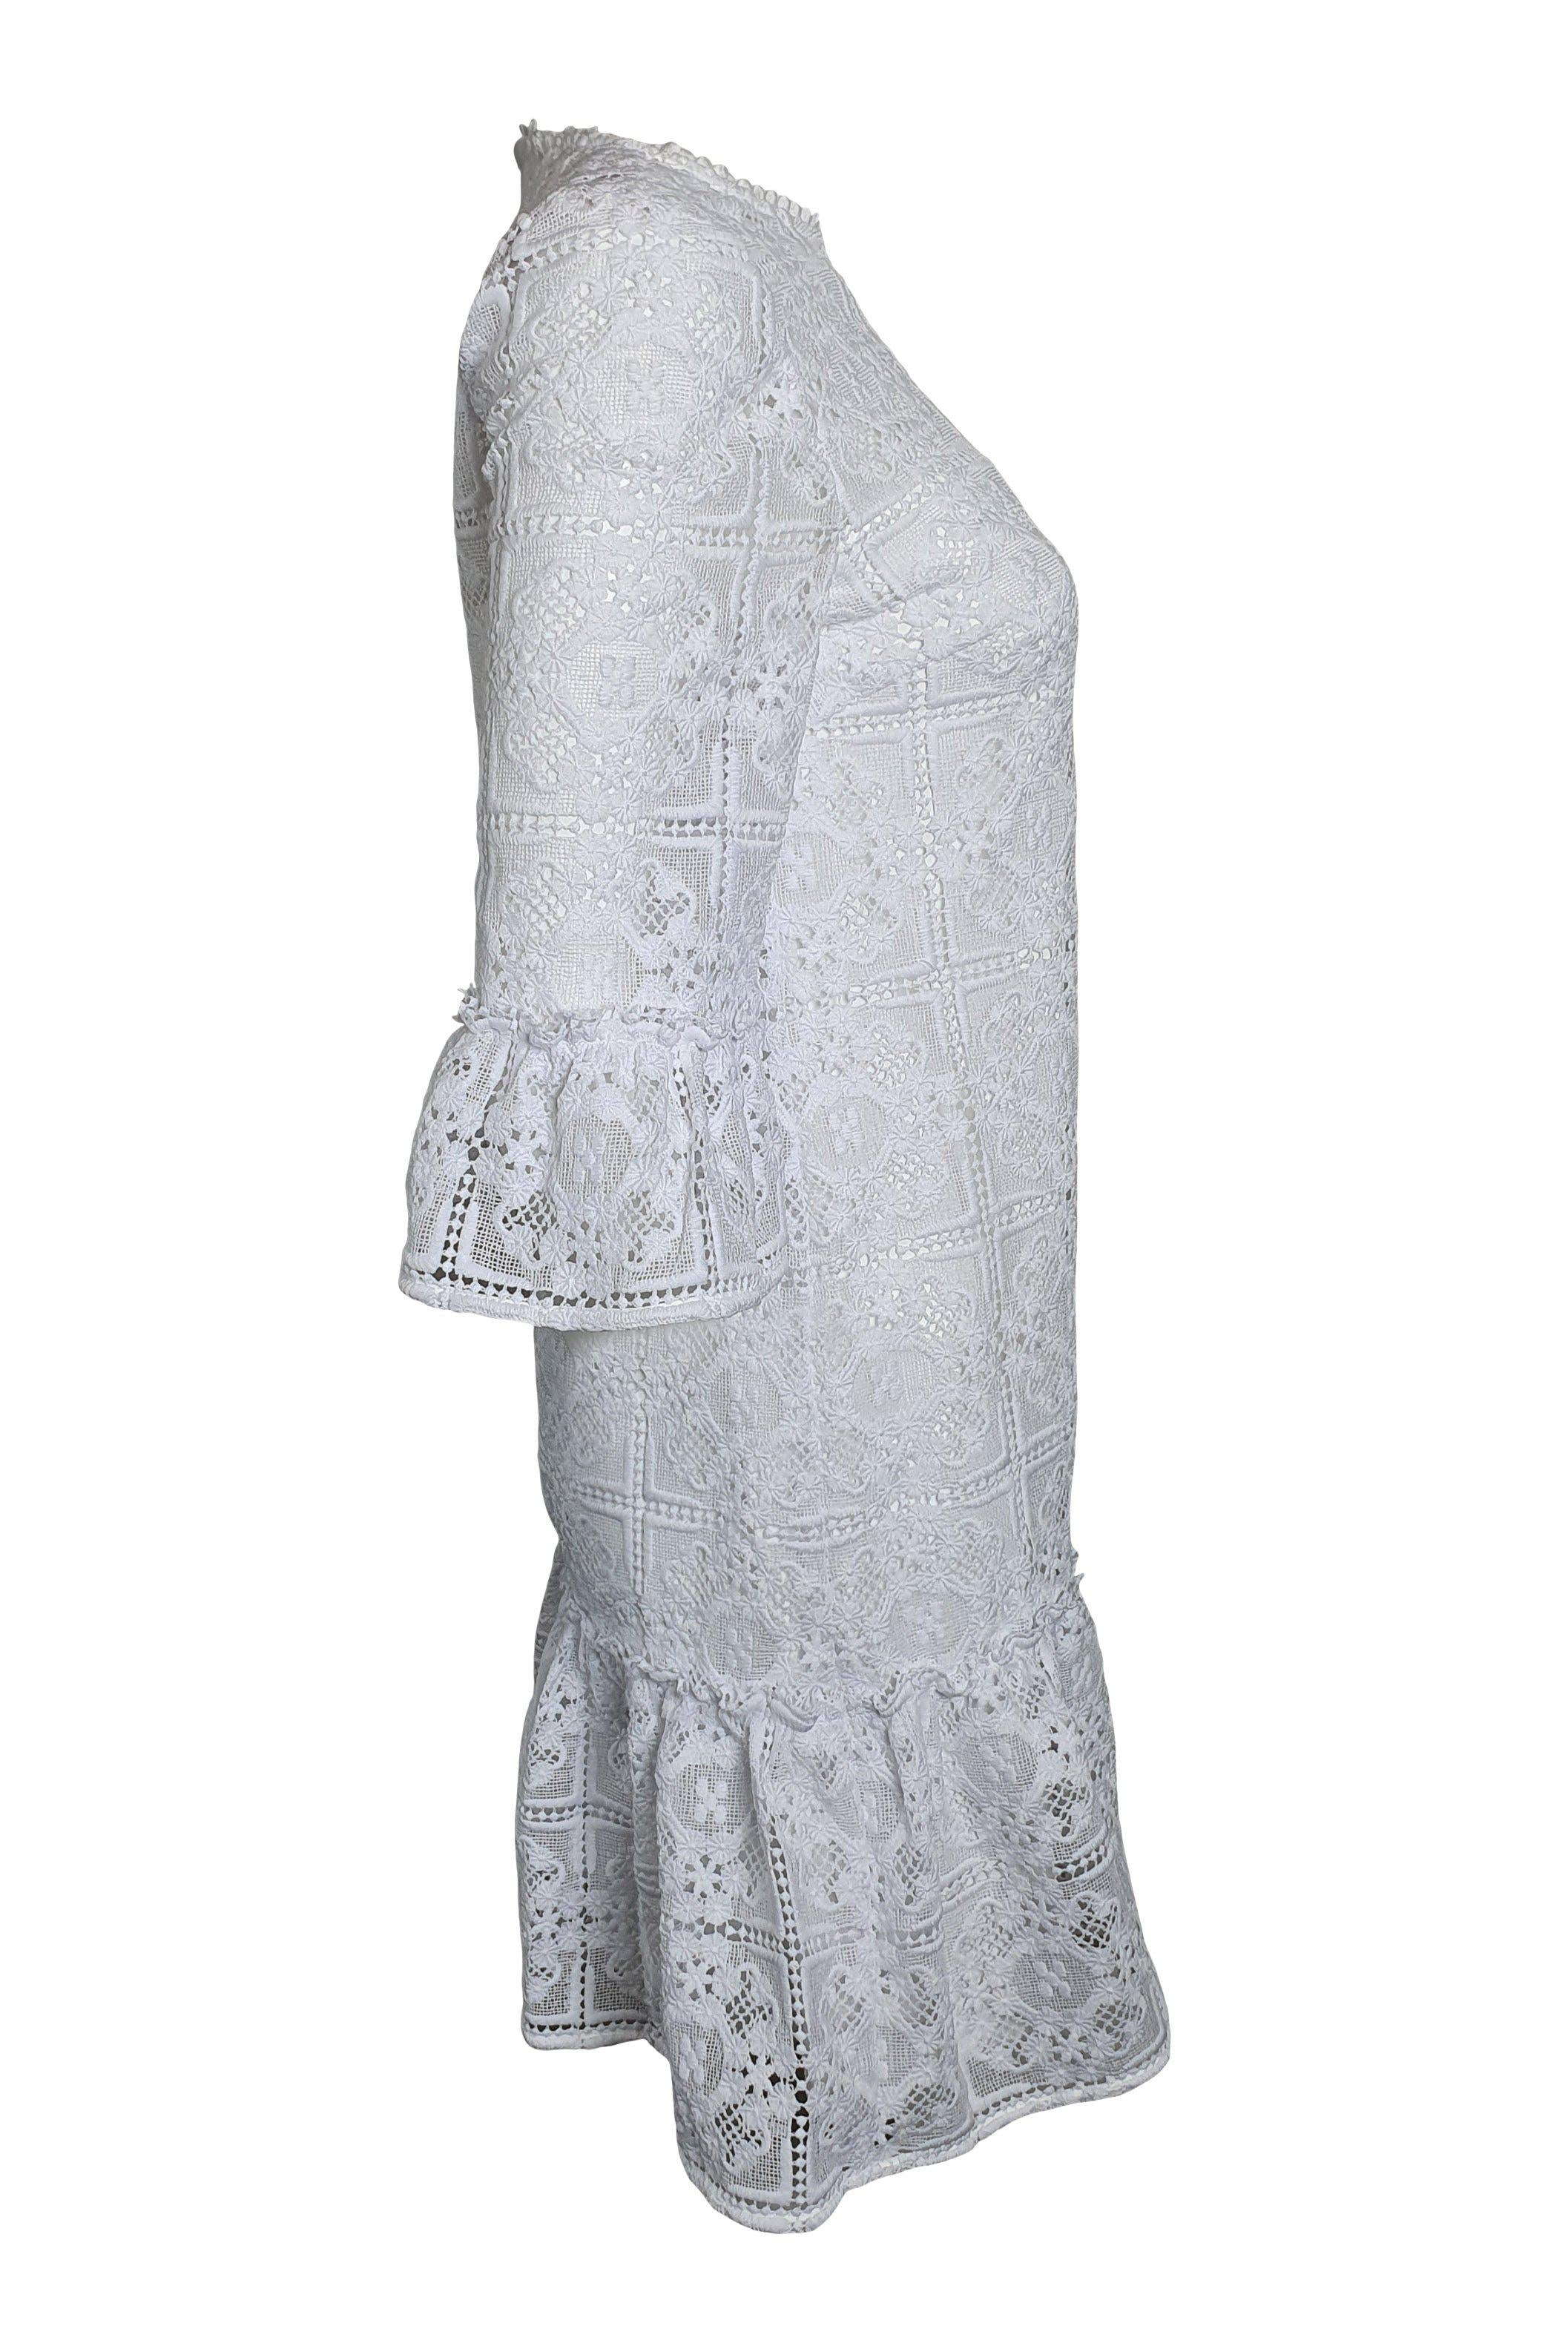 KATE SPADE New York White Scenic Route Lace Flounce Shift Dress (US 0 | UK 6)-The Freperie